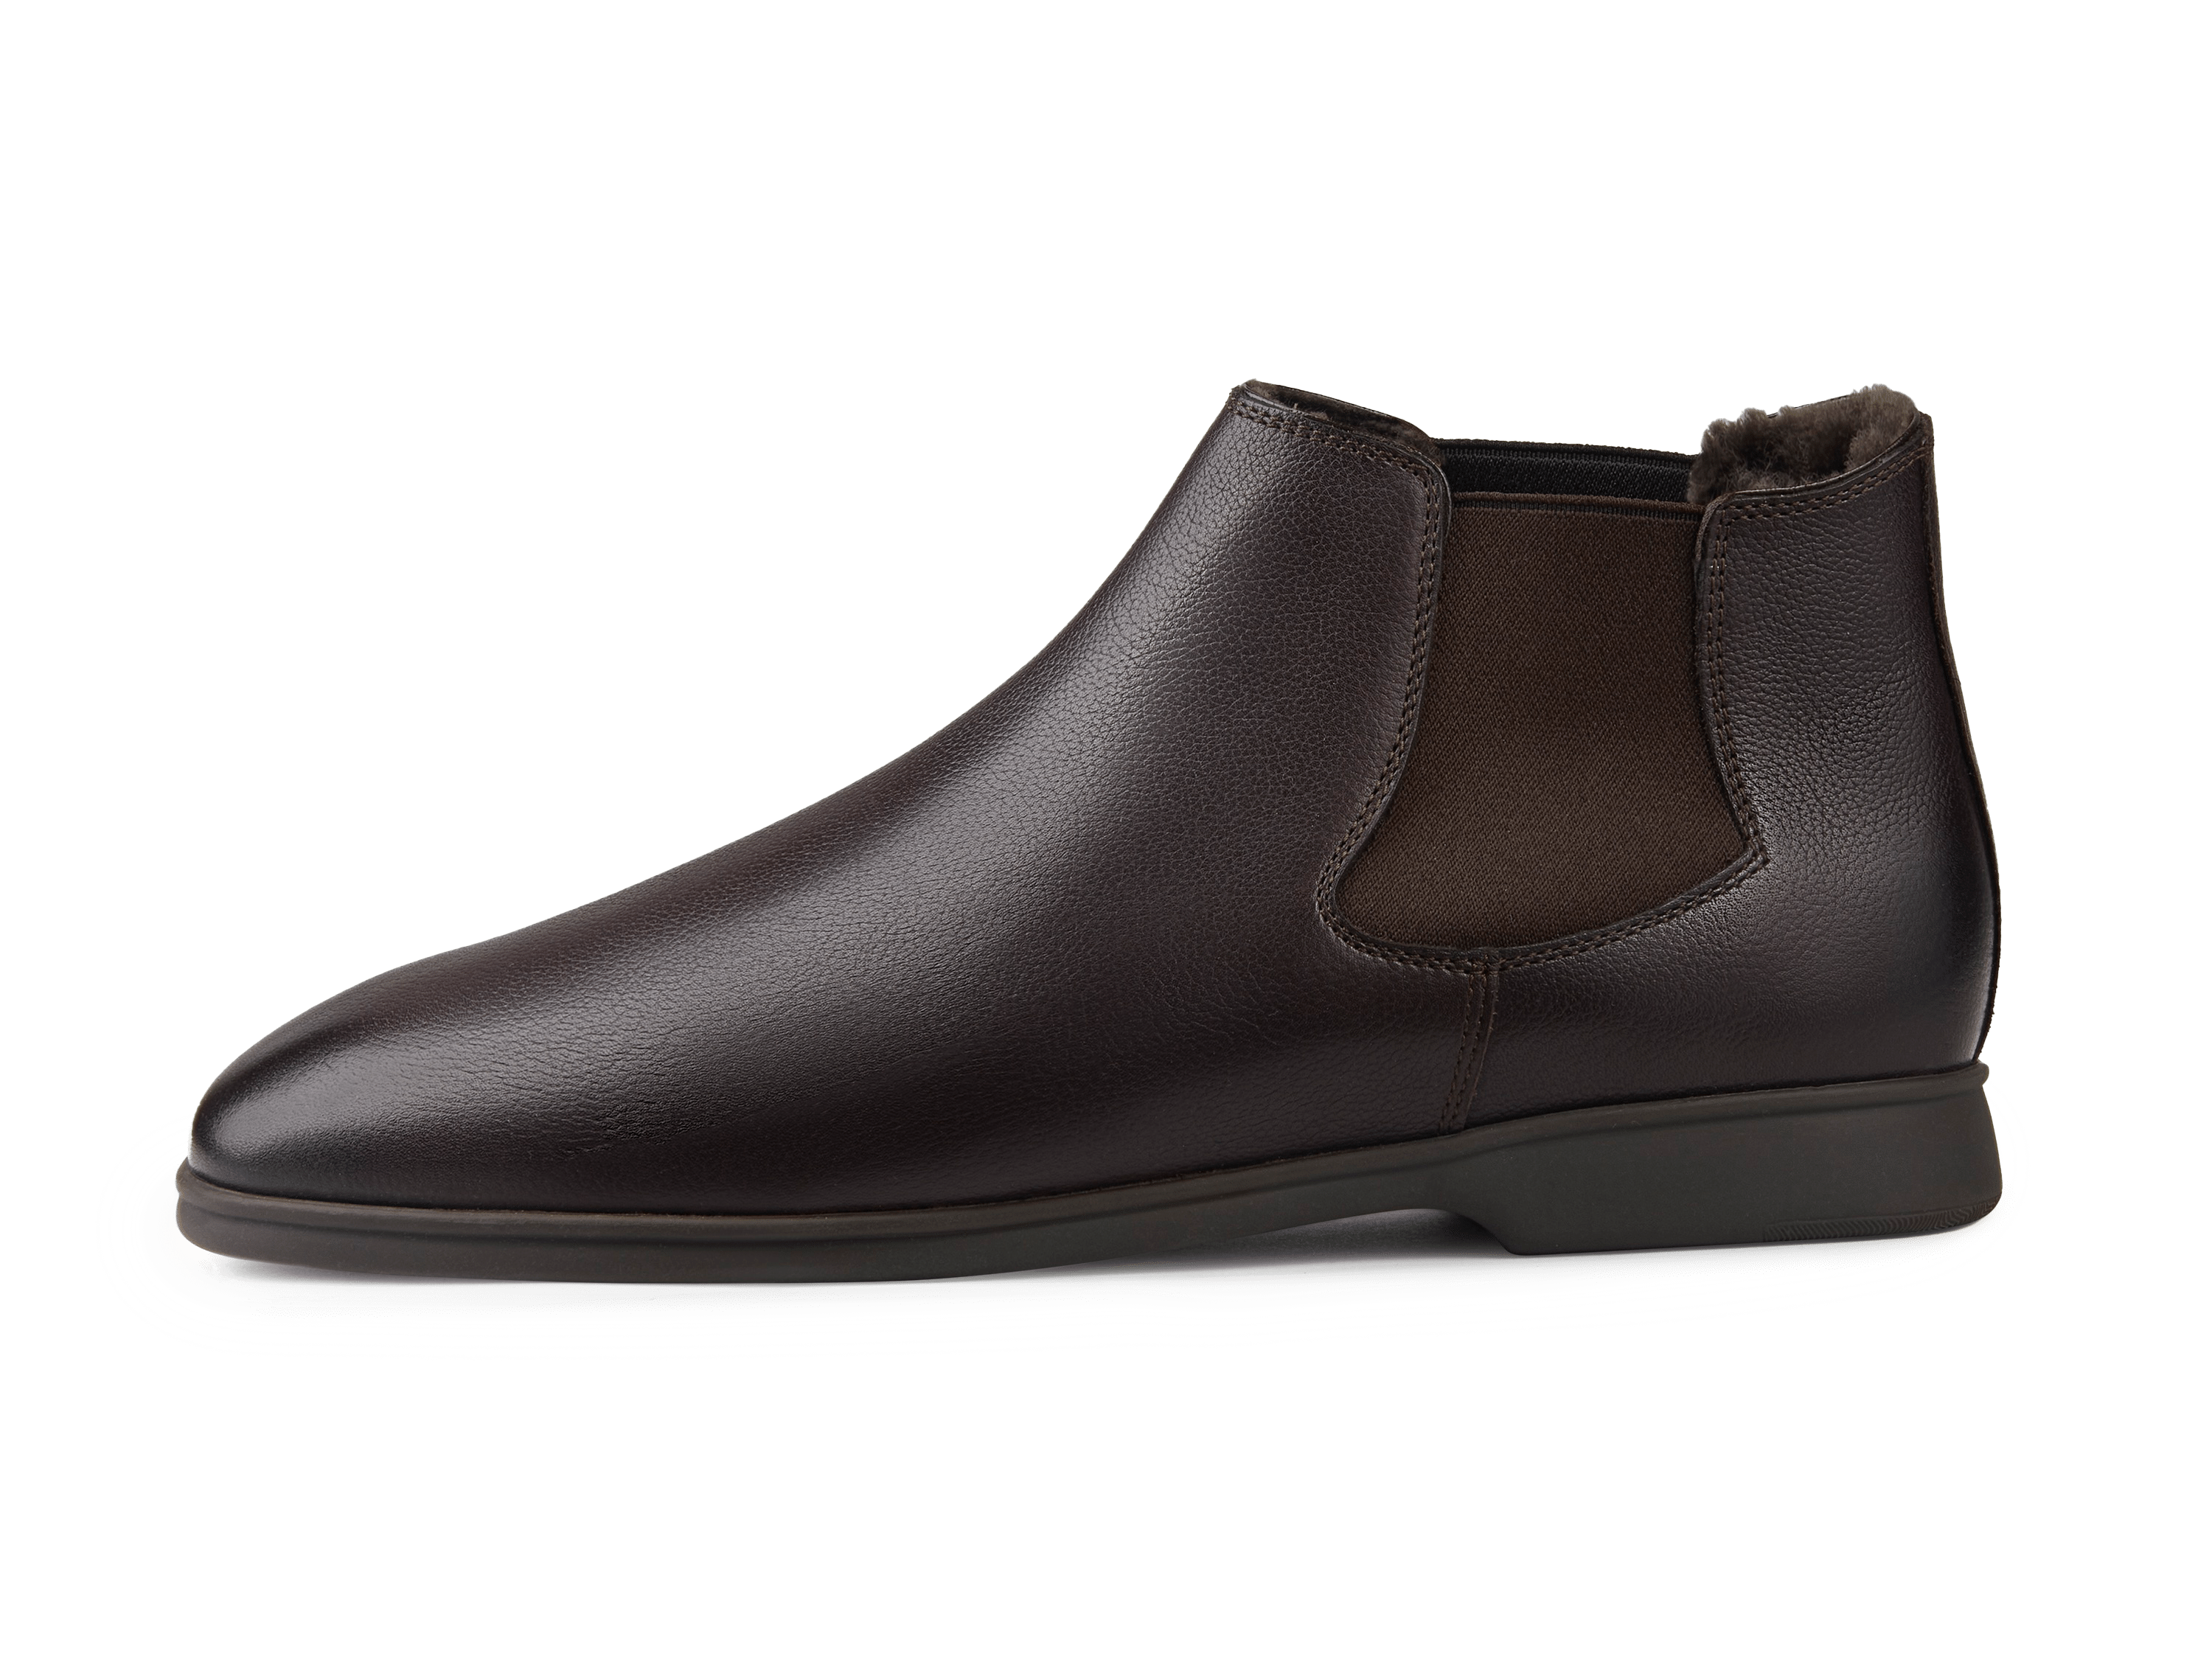 Rover in Boots Dark Brown Grain Calf with Shearling Lining